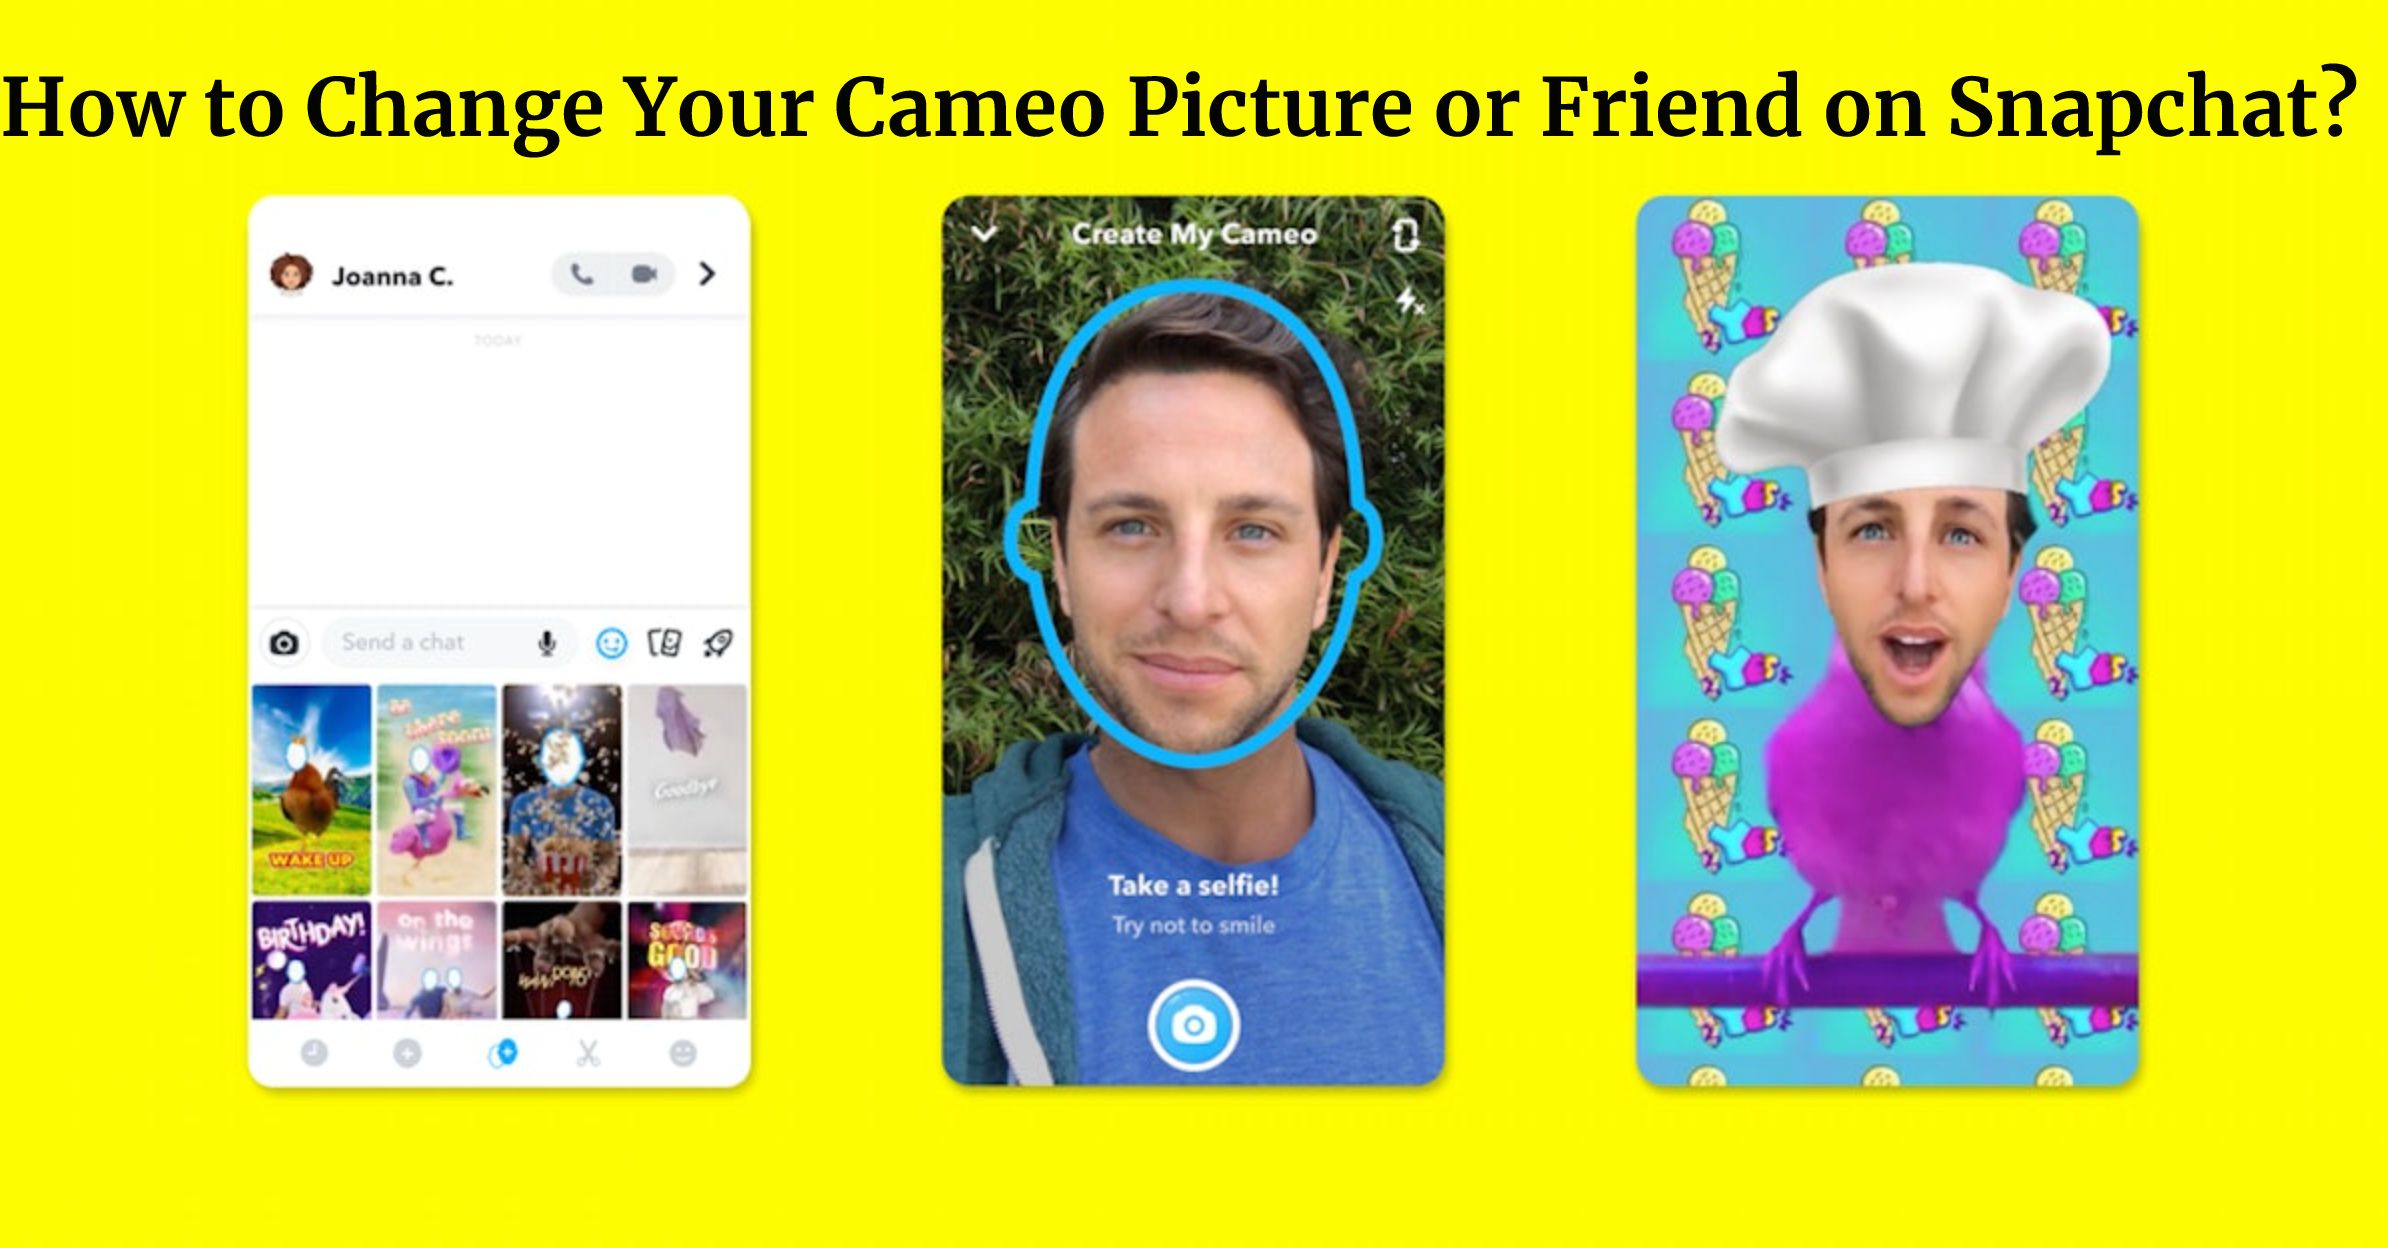 How to Change Your Cameo Picture or Friend on Snapchat